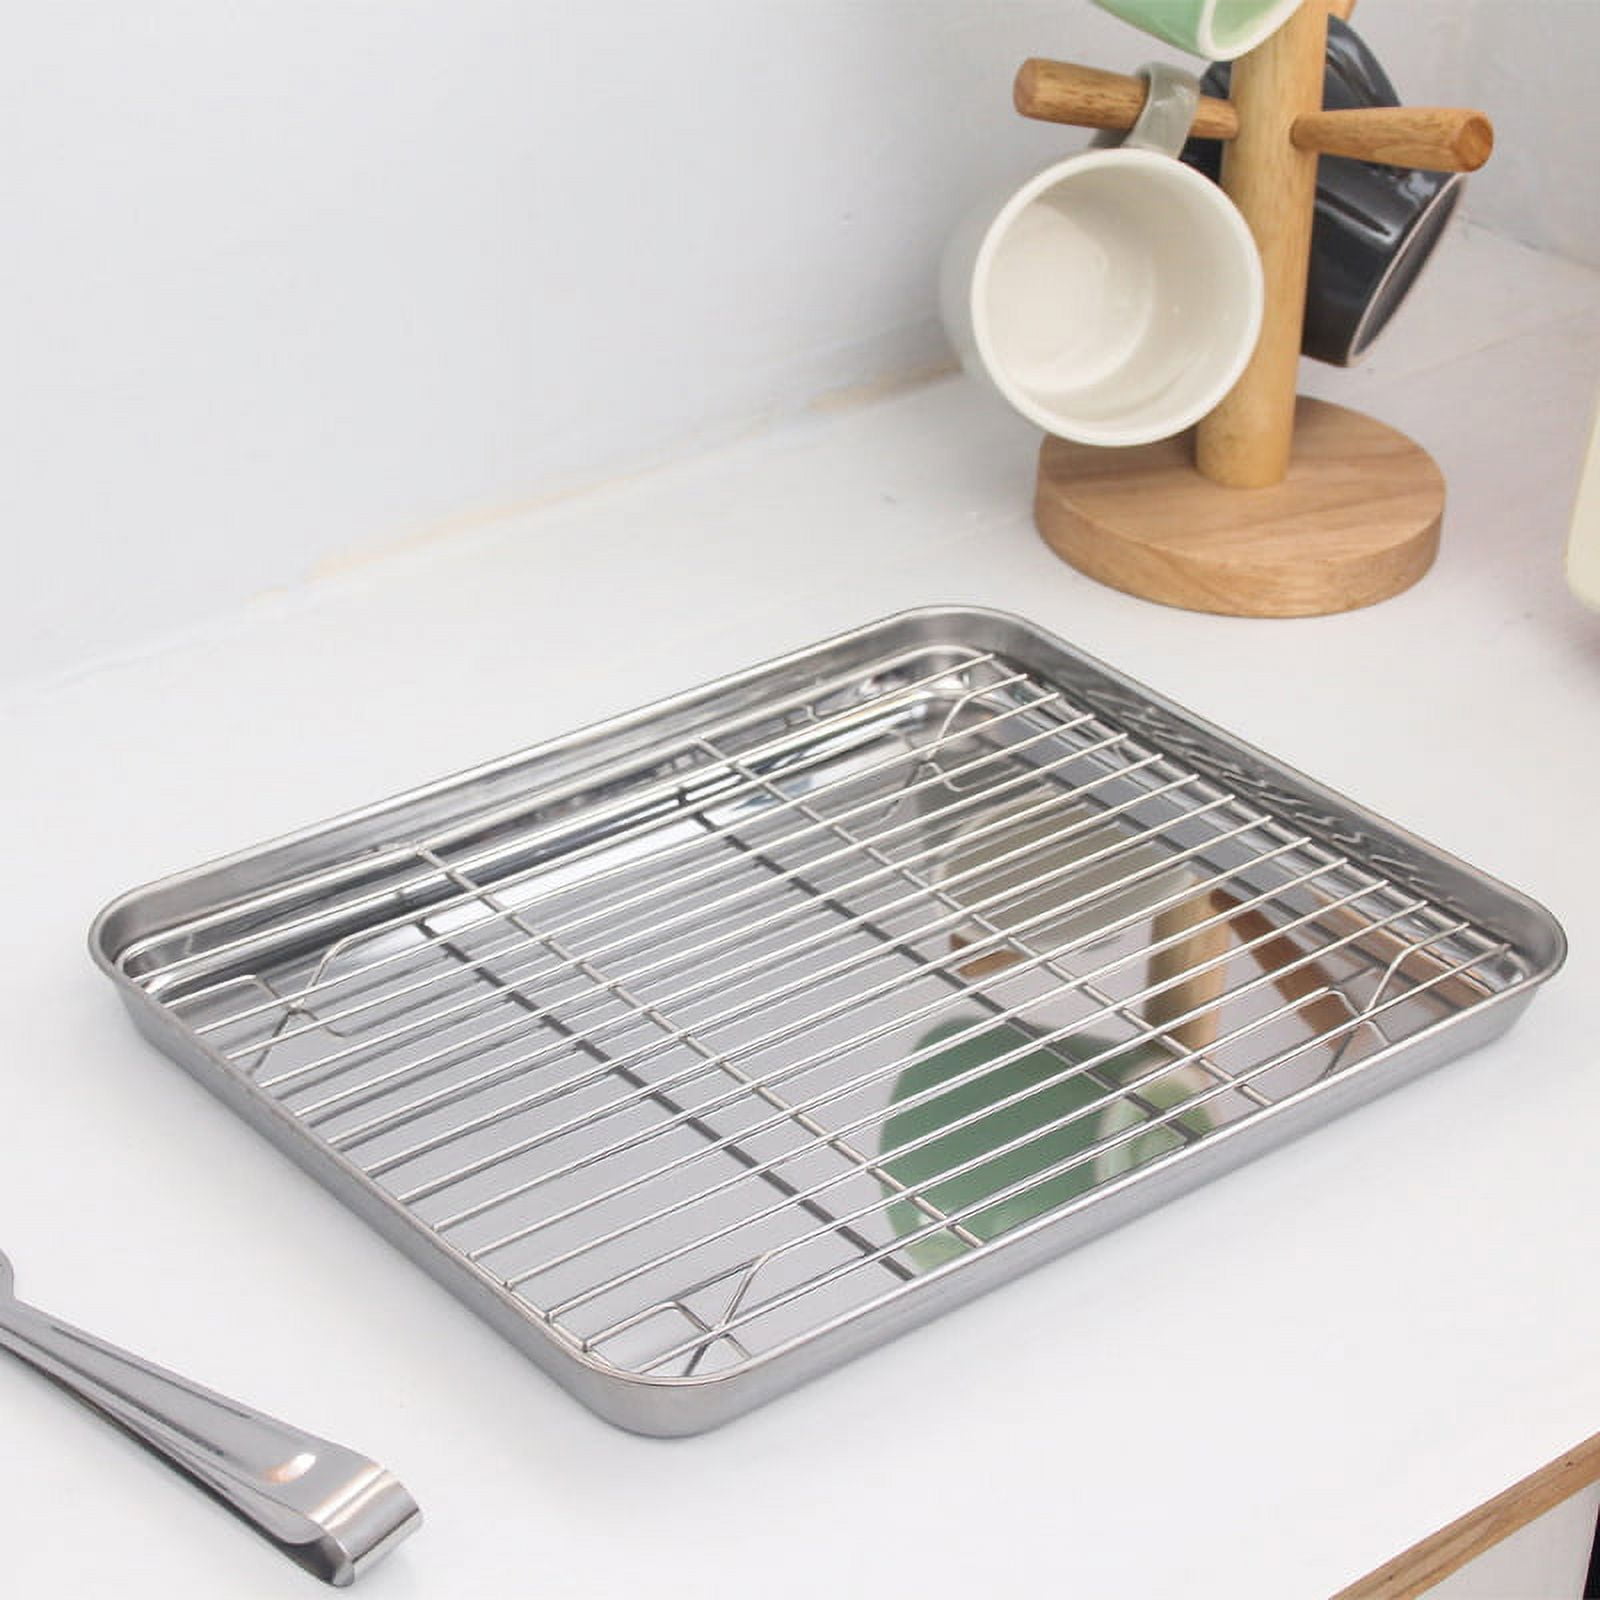 Universal Oven Cooker Complete Grill Pan & Food Rack Fits Many Brands